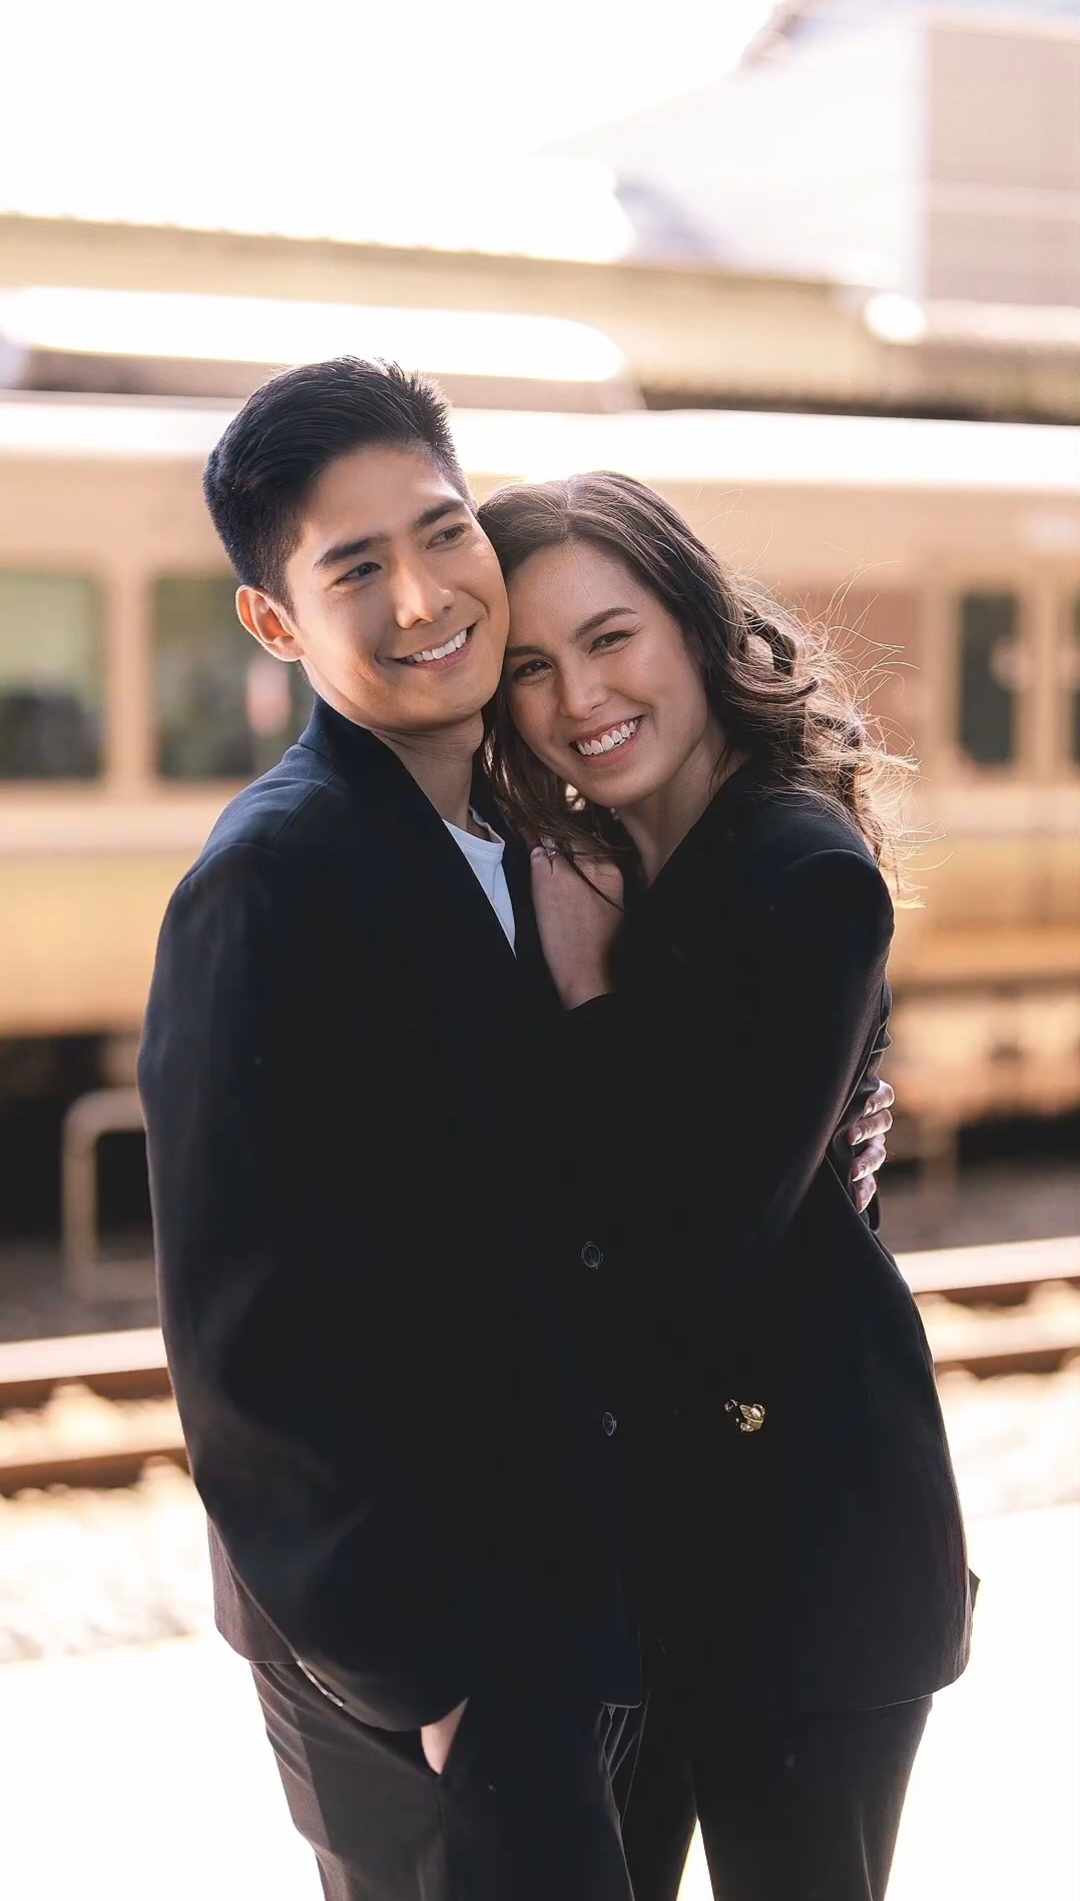 Robi Domingo and Maiqui Pineda have engagement shoot in Japan